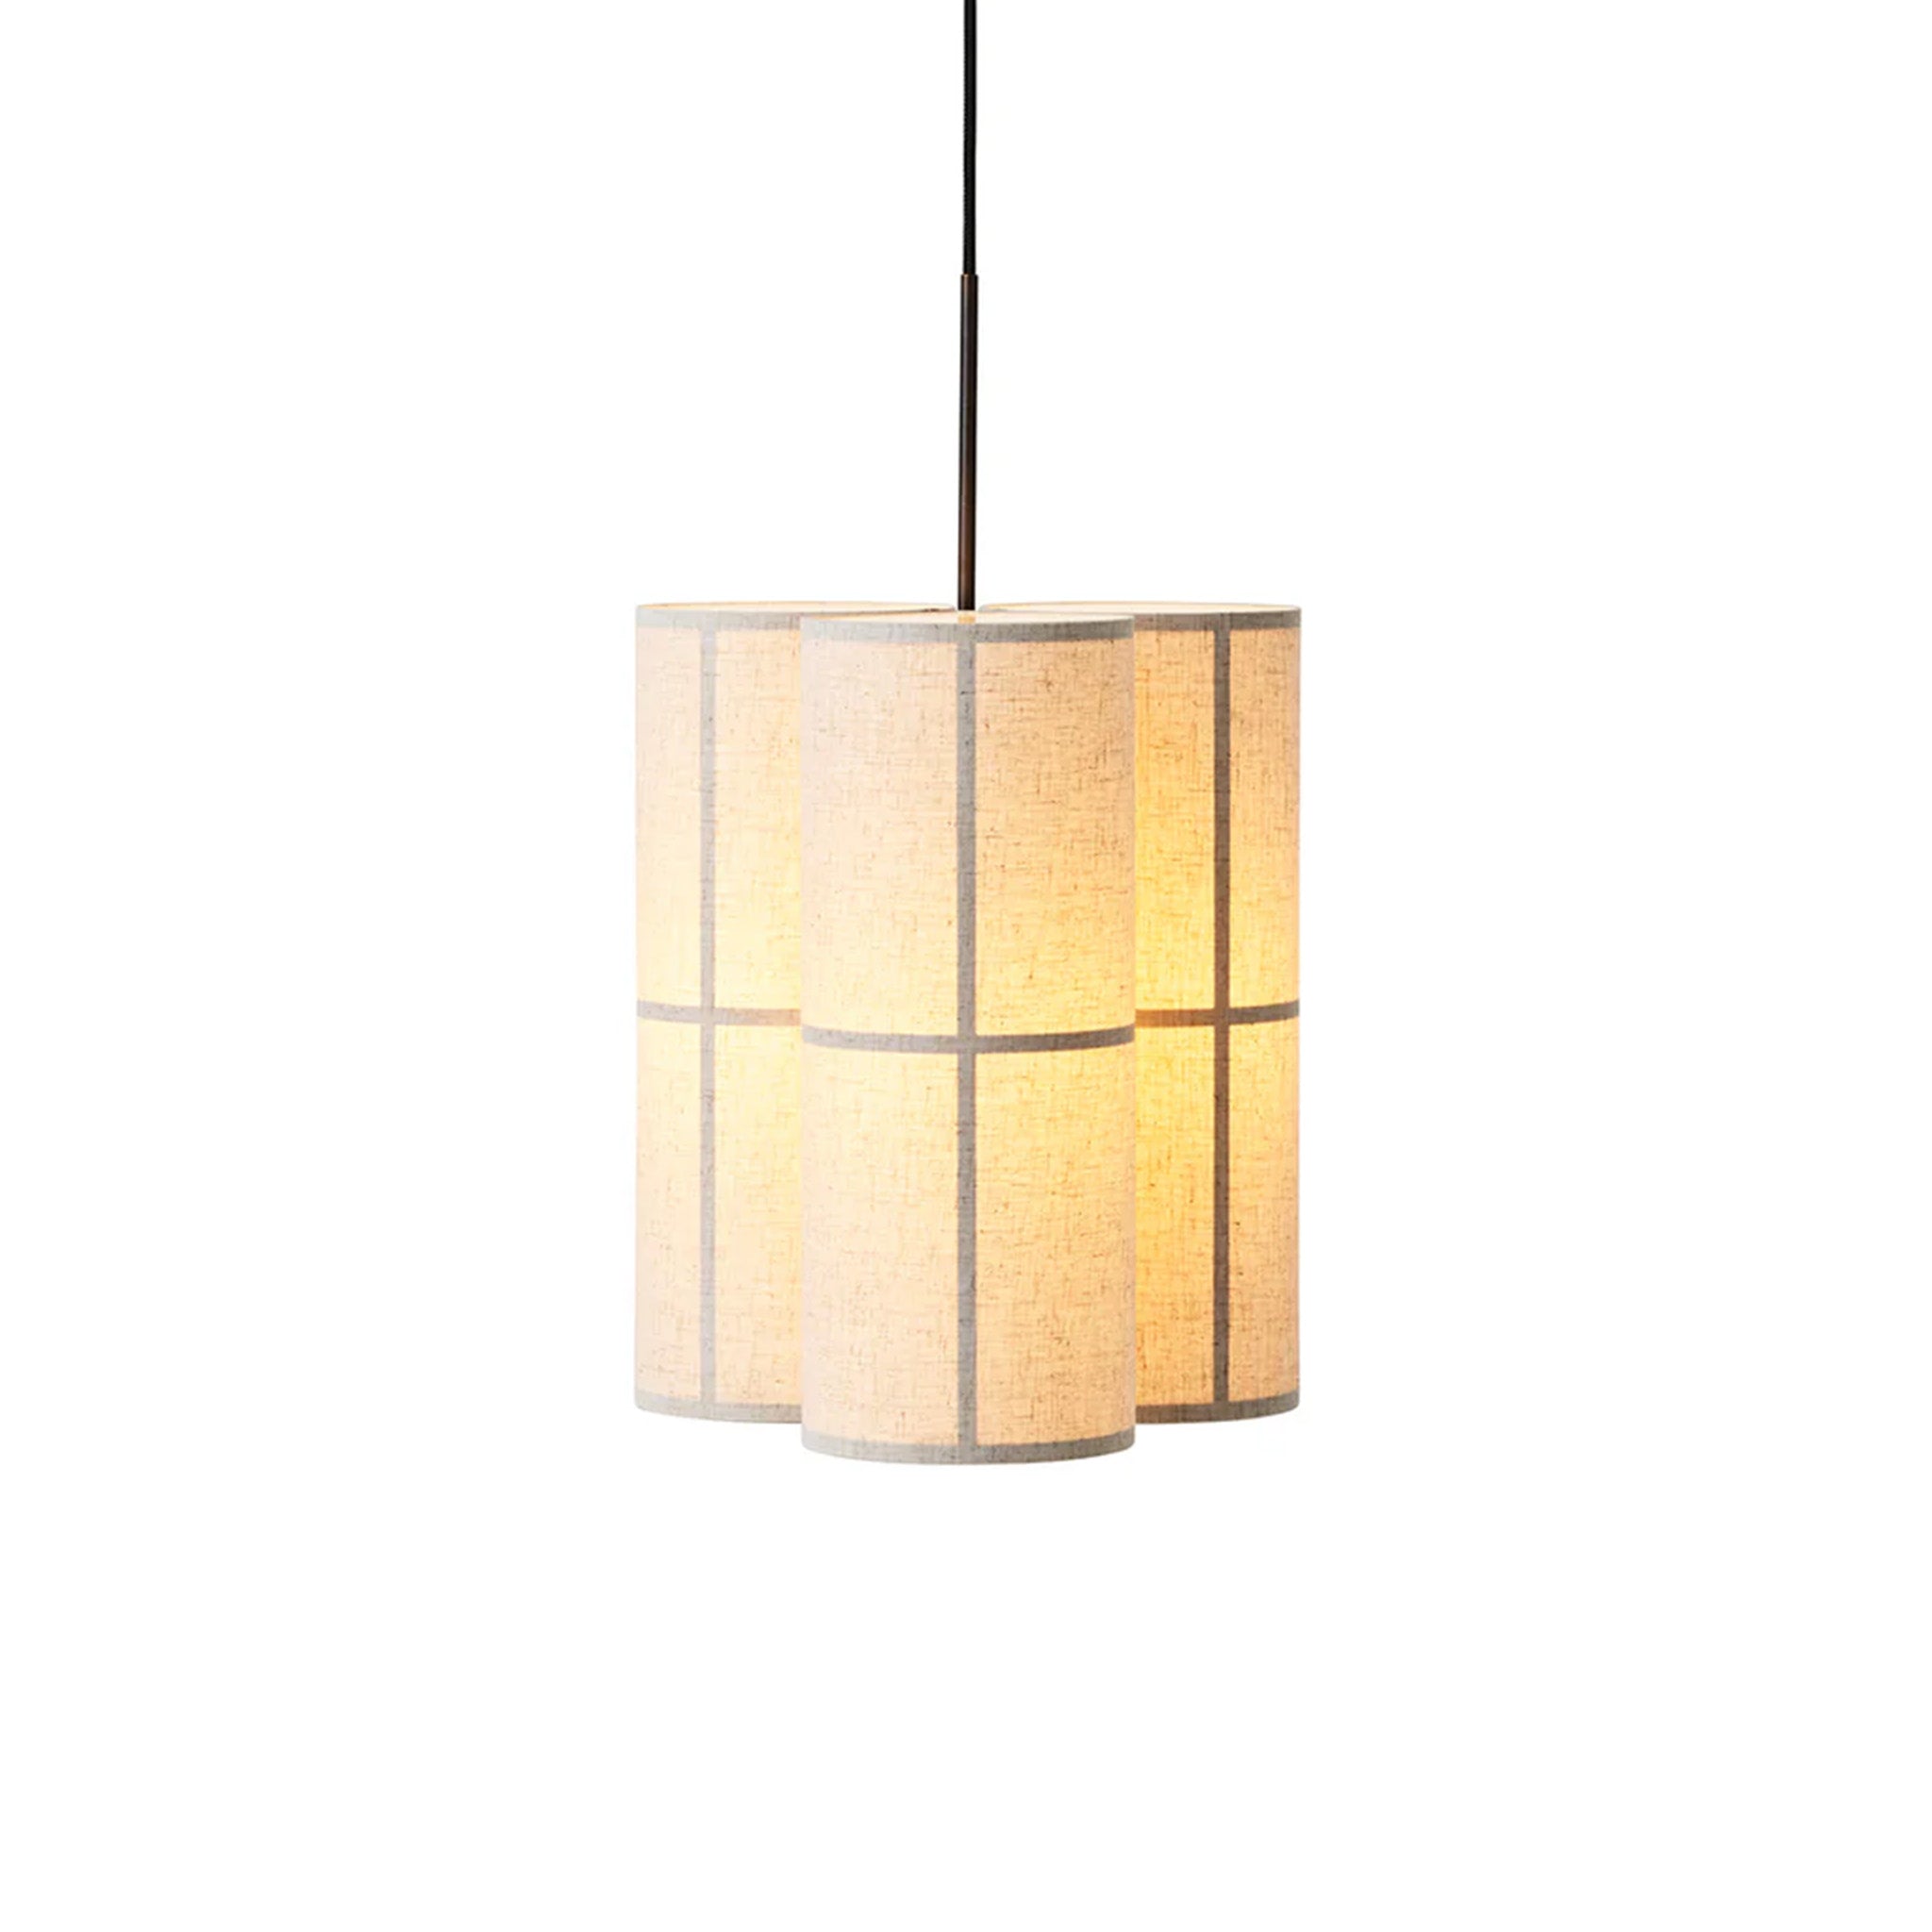 Hashira Cluster Pendant Light by Norm Architects